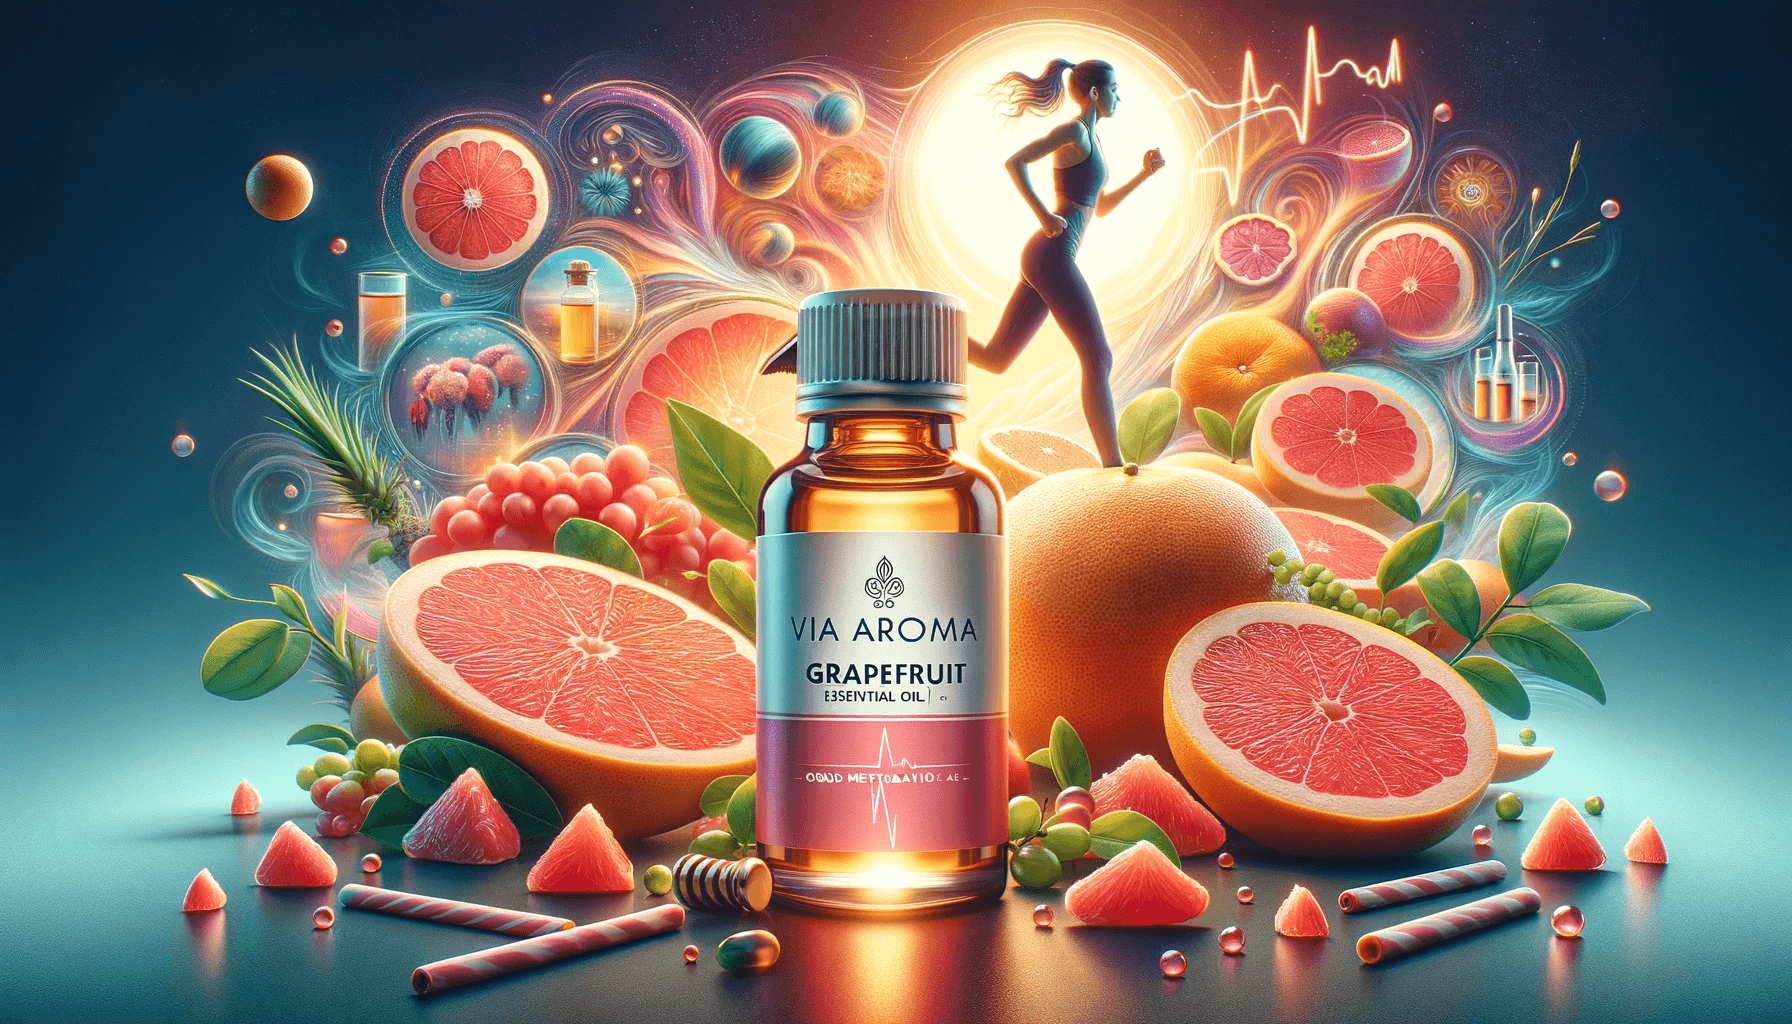 DALL·E 2024 01 23 15.42.17 Craft a dynamic and inspiring composition that illustrates the connection between Via Aroma grapefruit essential oil and good metabolism. The scene fe